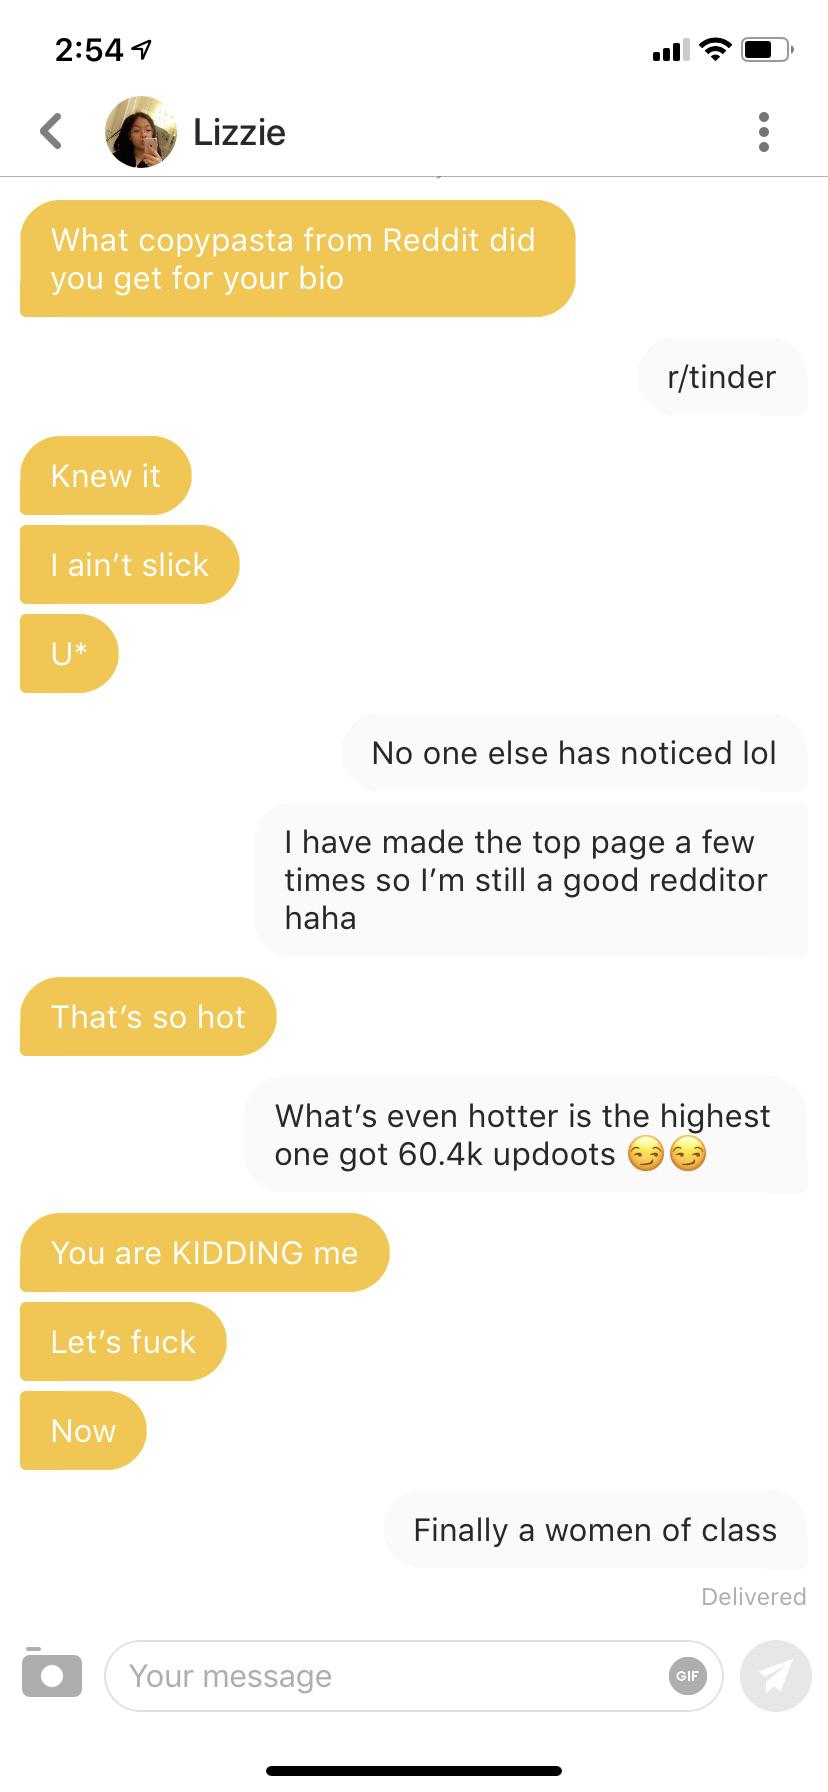 Tinder pickup lines - document - Lizzie What copypasta from Reddit did you get for your bio rtinder Knew it I ain't slick No one else has noticed lol I have made the top page a few times so I'm still a good redditor haha That's so hot What's even hotter i